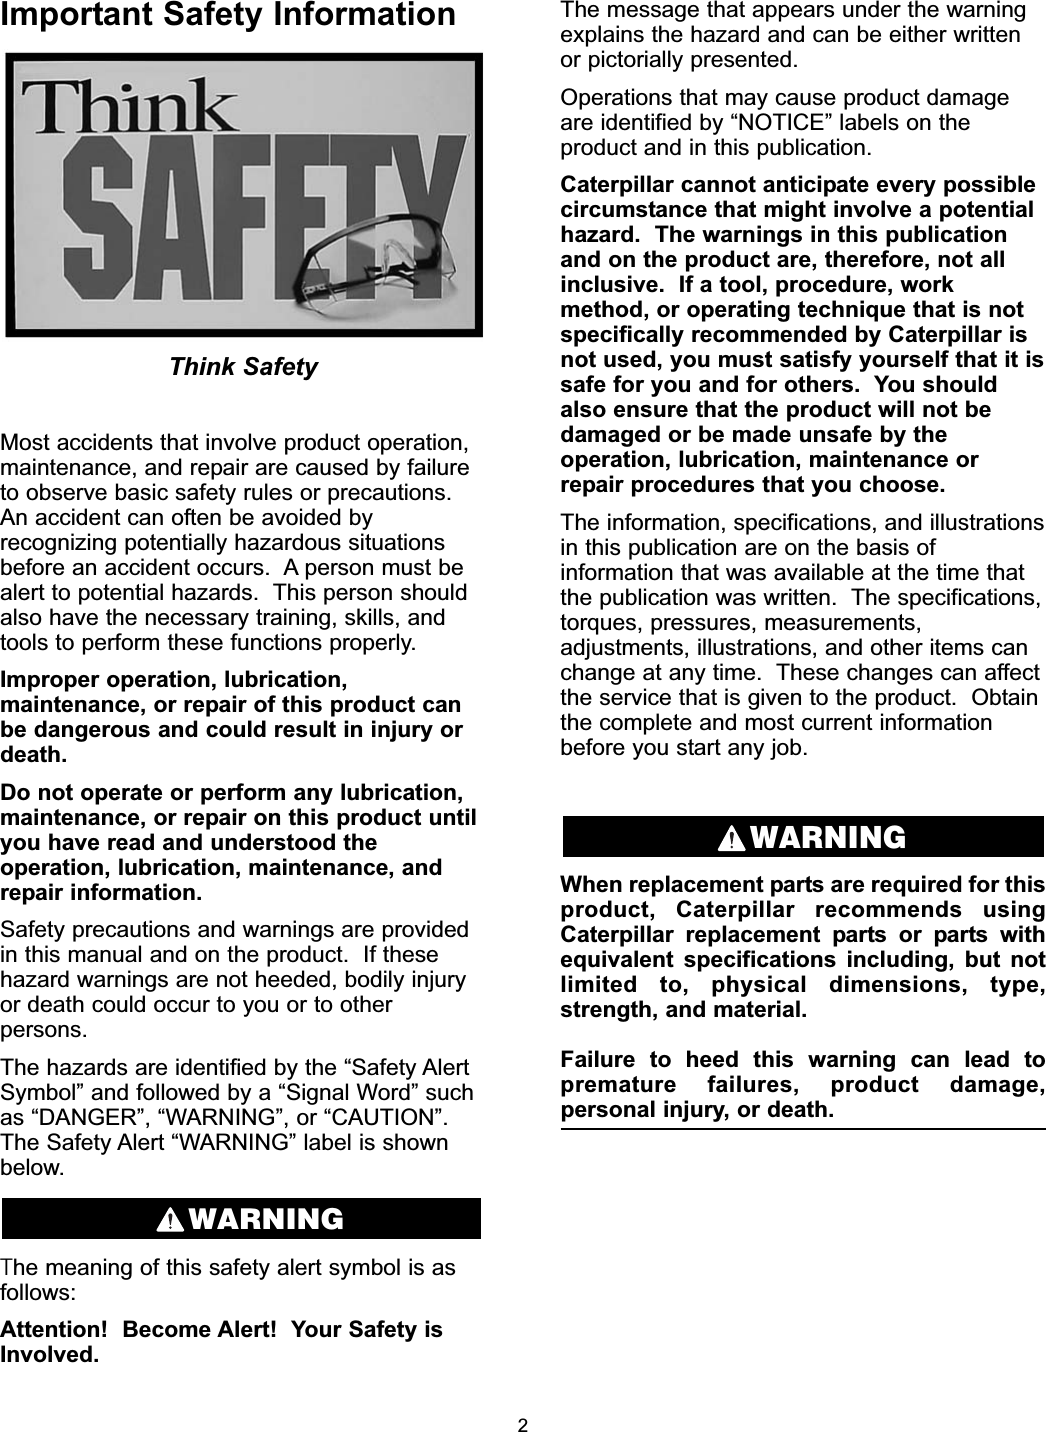 Important Safety InformationThink SafetyMost accidents that involve product operation,maintenance, and repair are caused by failureto observe basic safety rules or precautions.An accident can often be avoided byrecognizing potentially hazardous situationsbefore an accident occurs.  A person must bealert to potential hazards.  This person shouldalso have the necessary training, skills, andtools to perform these functions properly.Improper operation, lubrication,maintenance, or repair of this product canbe dangerous and could result in injury ordeath.Do not operate or perform any lubrication,maintenance, or repair on this product untilyou have read and understood theoperation, lubrication, maintenance, andrepair information.Safety precautions and warnings are providedin this manual and on the product.  If thesehazard warnings are not heeded, bodily injuryor death could occur to you or to otherpersons.The hazards are identified by the “Safety AlertSymbol” and followed by a “Signal Word” suchas “DANGER”, “WARNING”, or “CAUTION”.The Safety Alert “WARNING” label is shownbelow.The meaning of this safety alert symbol is asfollows:Attention!  Become Alert!  Your Safety isInvolved.The message that appears under the warningexplains the hazard and can be either writtenor pictorially presented.Operations that may cause product damageare identified by “NOTICE” labels on theproduct and in this publication.Caterpillar cannot anticipate every possiblecircumstance that might involve a potentialhazard.  The warnings in this publicationand on the product are, therefore, not allinclusive.  If a tool, procedure, workmethod, or operating technique that is notspecifically recommended by Caterpillar isnot used, you must satisfy yourself that it issafe for you and for others.  You shouldalso ensure that the product will not bedamaged or be made unsafe by theoperation, lubrication, maintenance orrepair procedures that you choose.The information, specifications, and illustrationsin this publication are on the basis ofinformation that was available at the time thatthe publication was written.  The specifications,torques, pressures, measurements,adjustments, illustrations, and other items canchange at any time.  These changes can affectthe service that is given to the product.  Obtainthe complete and most current informationbefore you start any job.When replacement parts are required for thisproduct, Caterpillar recommends usingCaterpillar replacement parts or parts withequivalent specifications including, but notlimited to, physical dimensions, type,strength, and material.Failure to heed this warning can lead topremature failures, product damage,personal injury, or death.WARNINGWARNING2